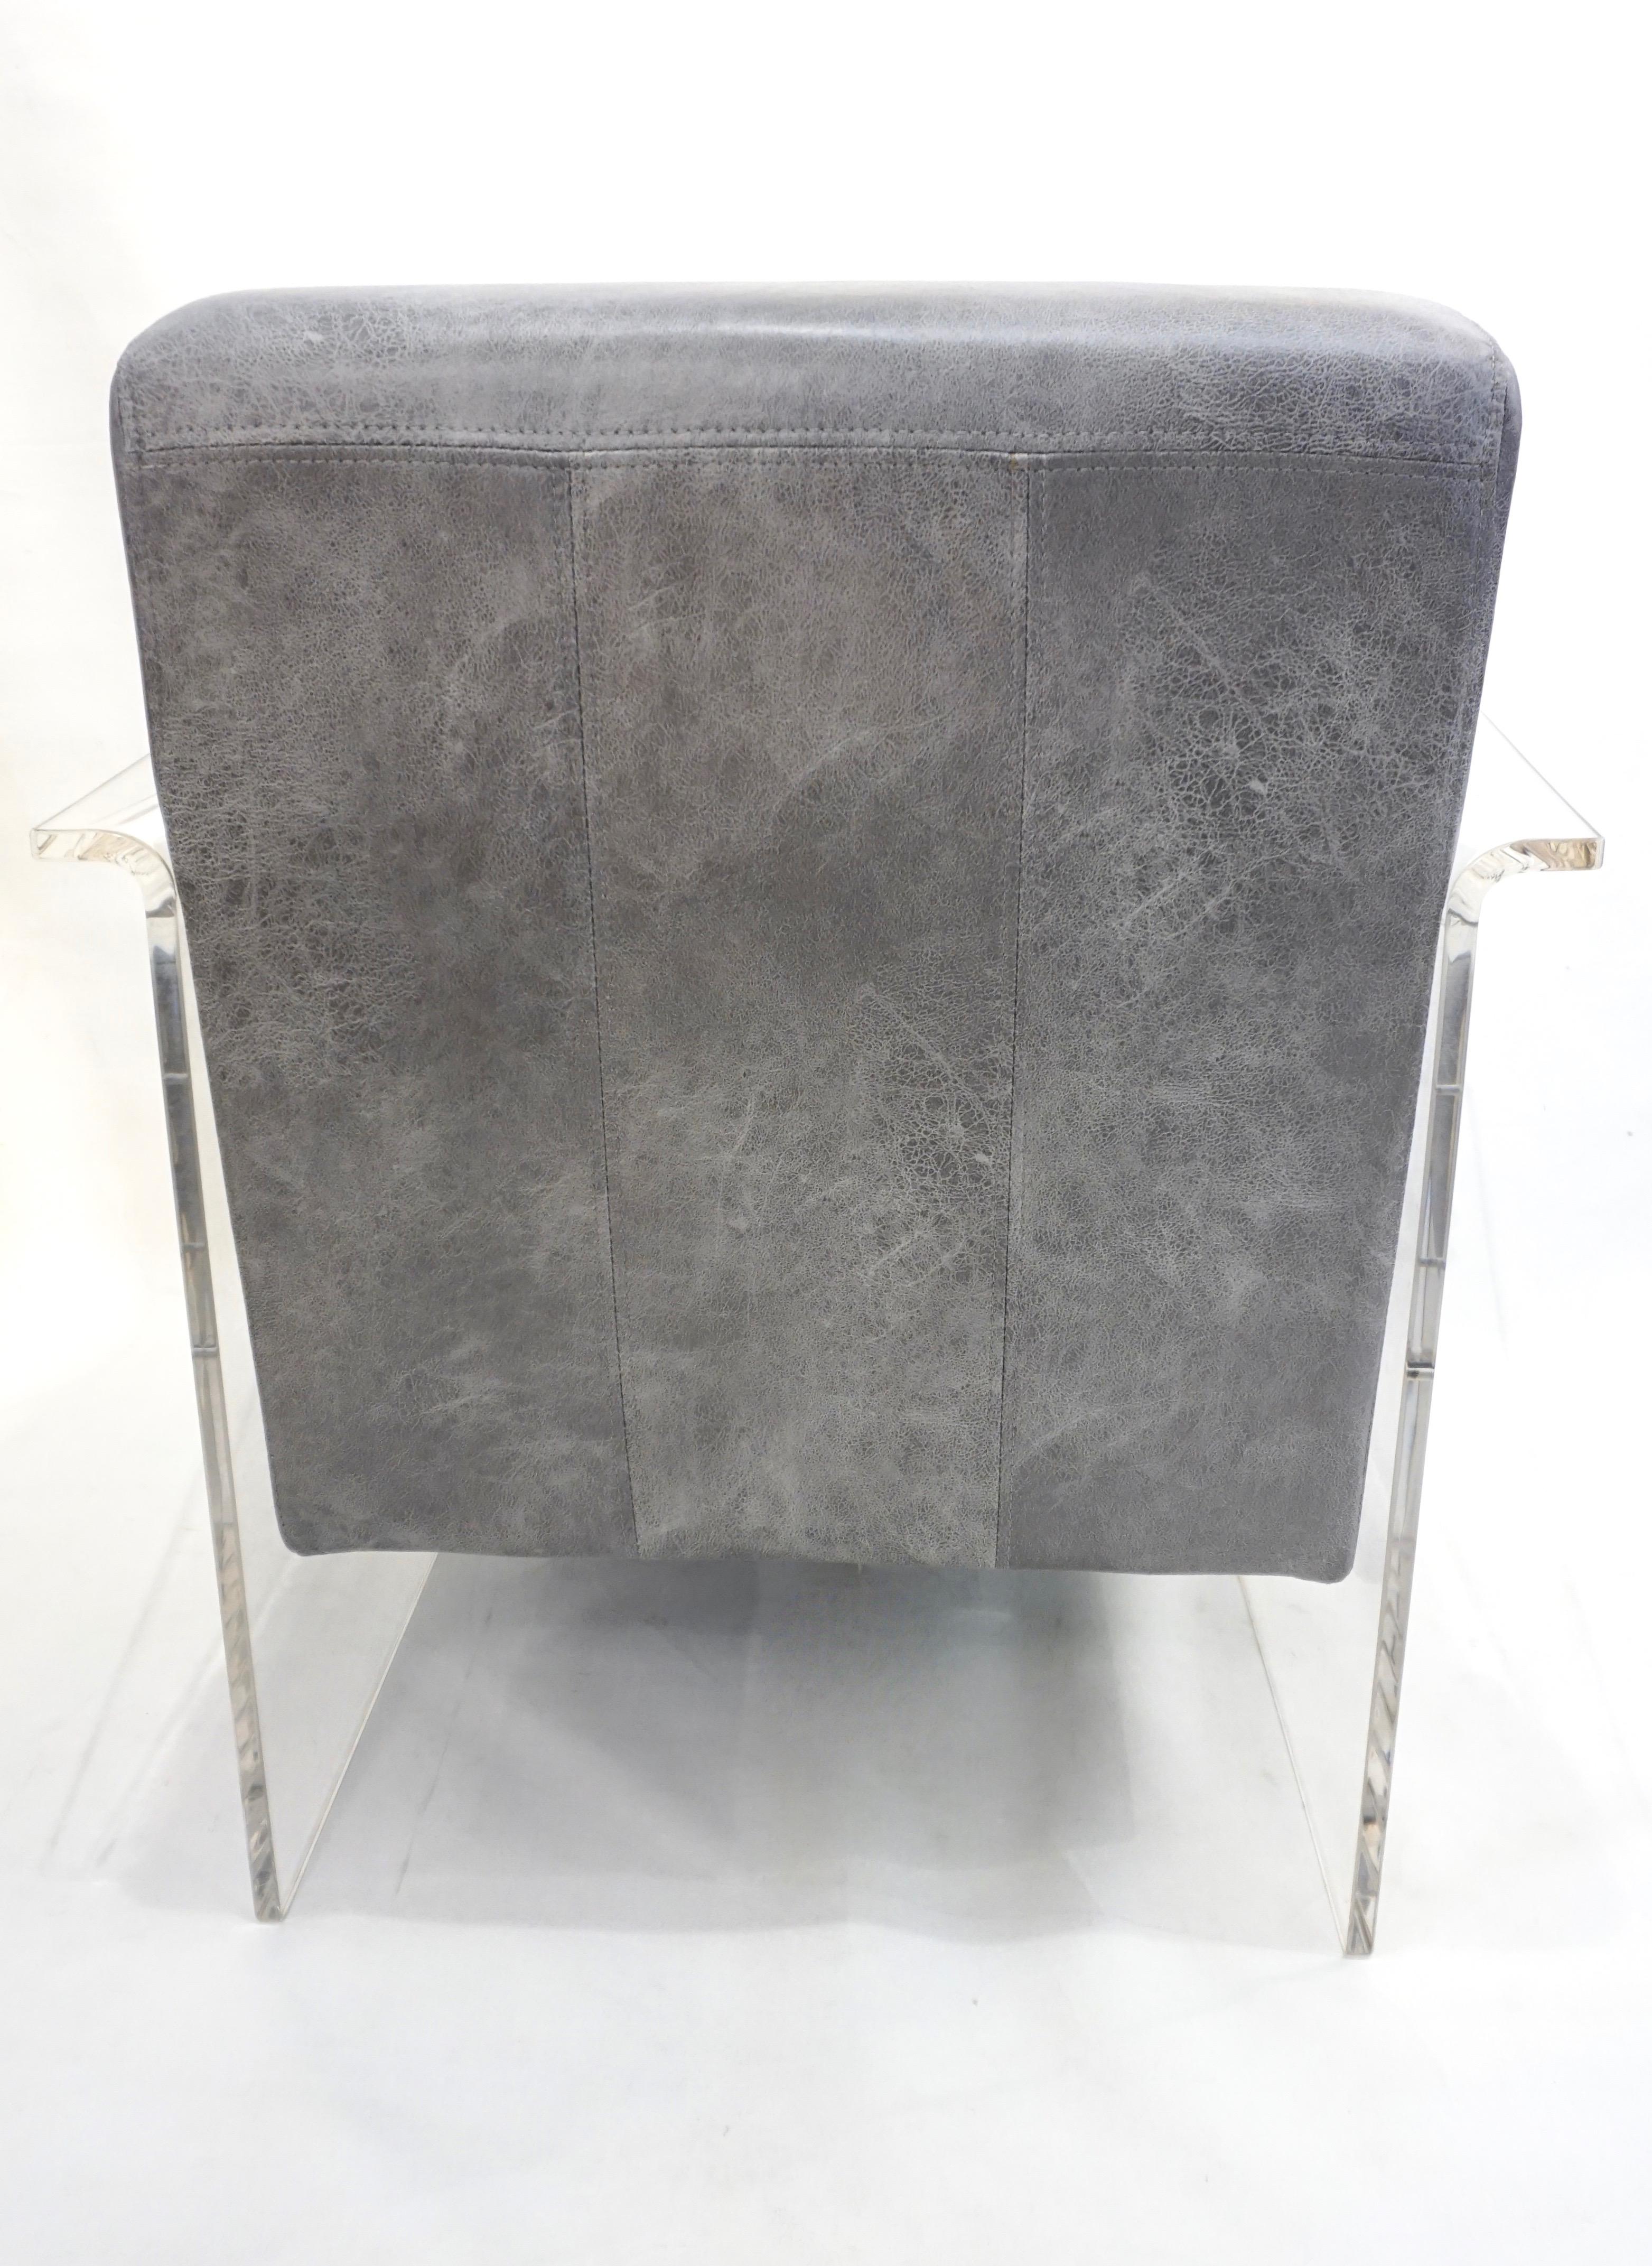 Organic Modern Bespoke Modernist Lucite Acrylic Lounge Armchair in Light Gray Faux Leather